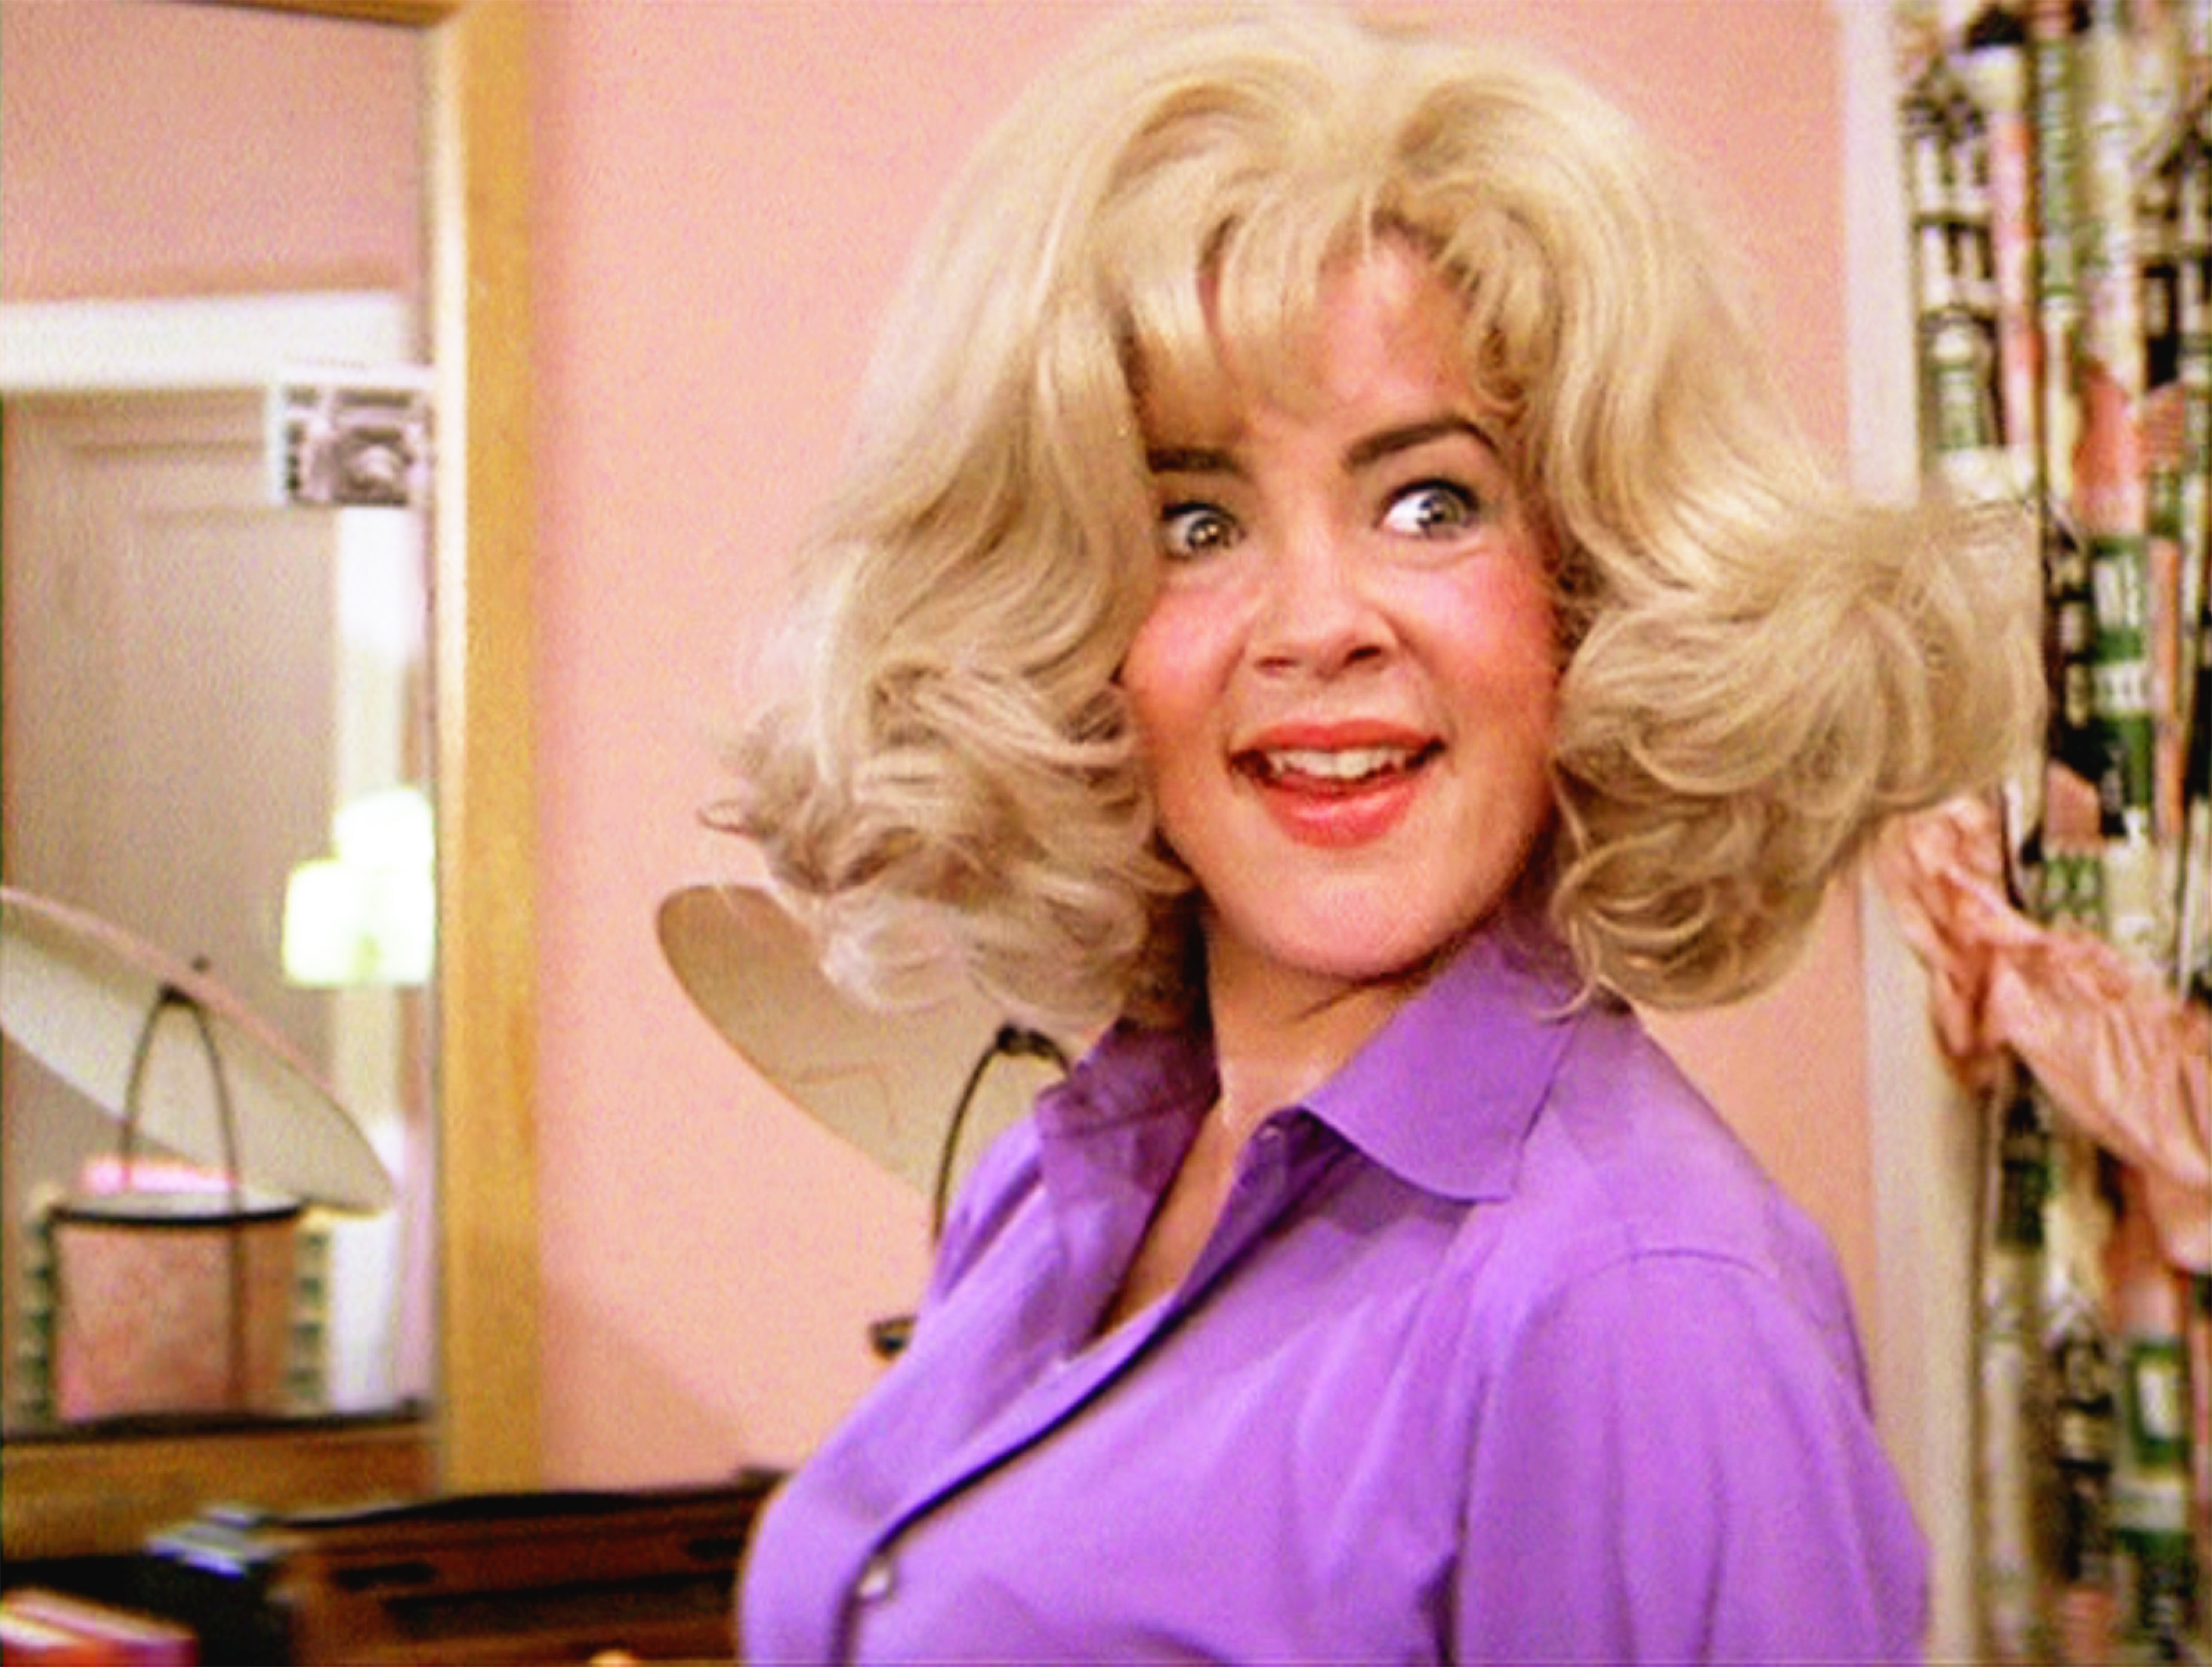 Stockard Channing as Betty Rizzo in "Grease" | Source: Getty Images